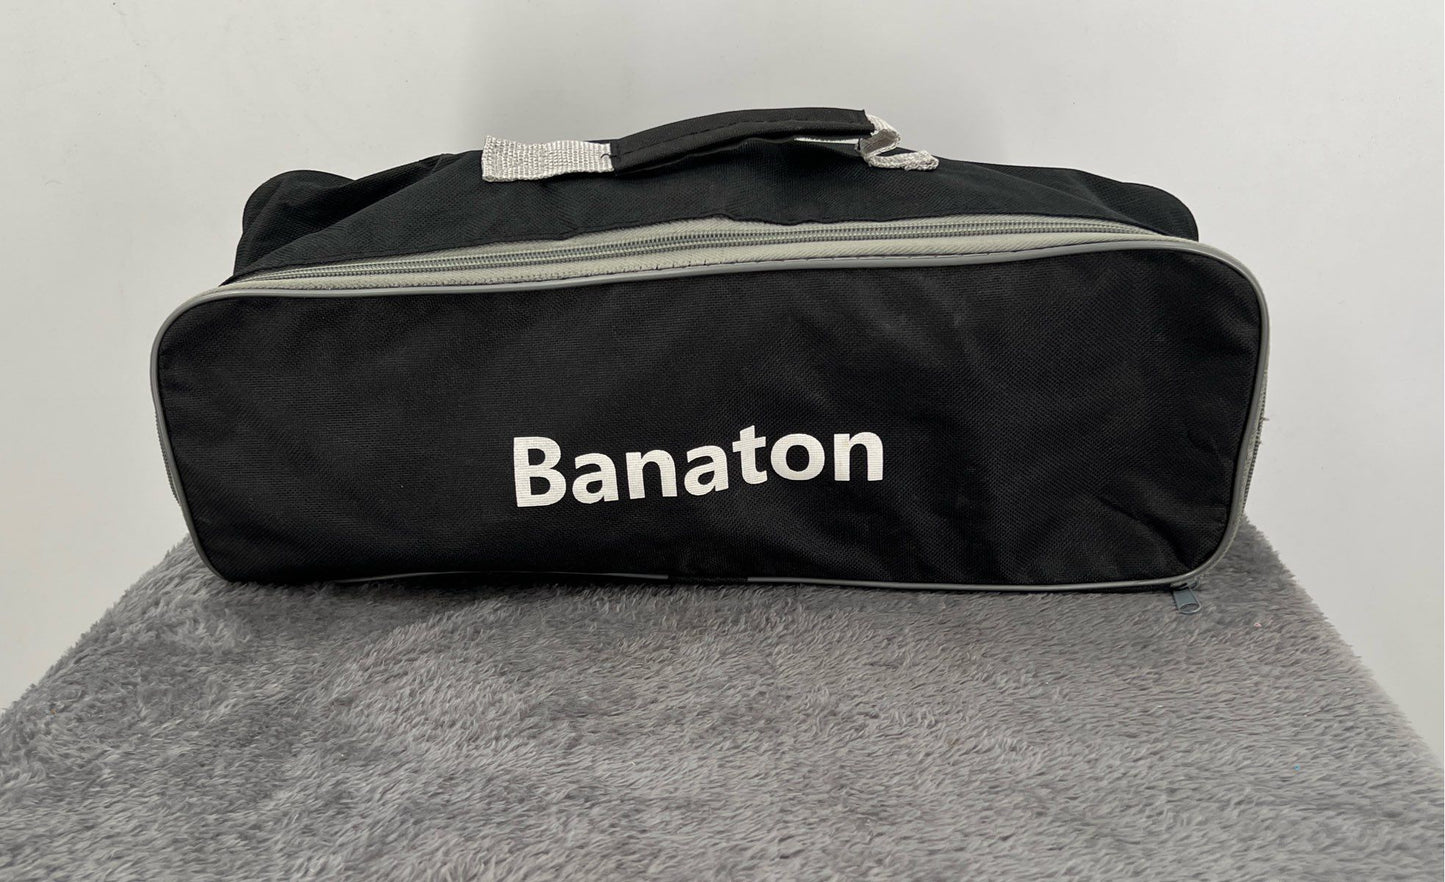 Banaton Car Vacuum Cleaner With Attachments And Carrying Case-Wet & Dry Use